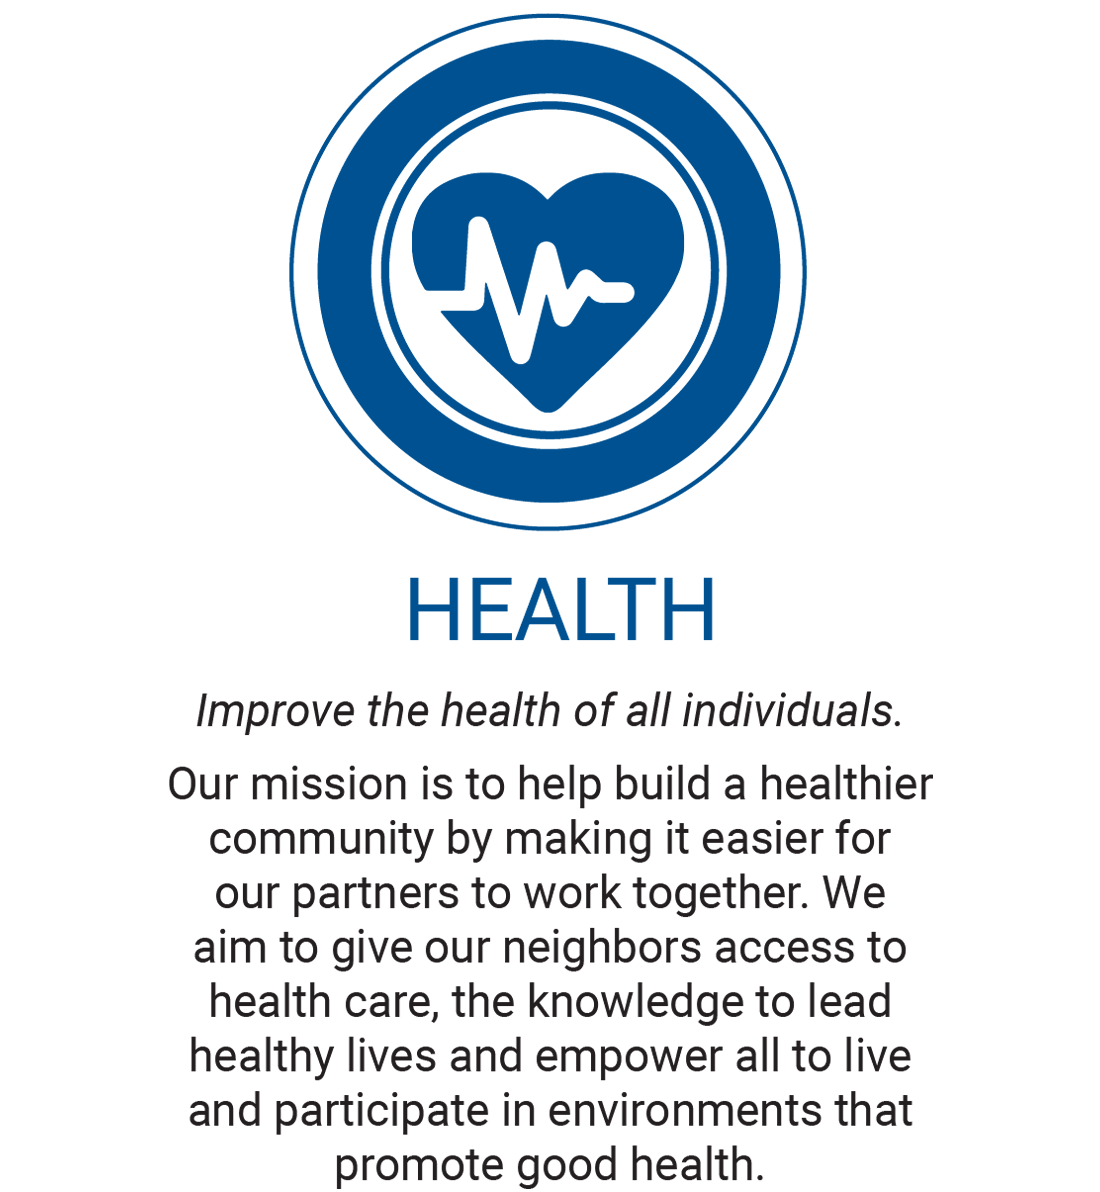 Blue heart with a heart beat to symbolize health inside of a larger blue circle. Text reads Health - Improve the health of all individuals. Our mission is to help build a healthier community by making it easier for our partners to work together. We aim to give our neighbors access to health care, the knowledge to lead healthy lives and empower all to live and participate in environments that promote good health.